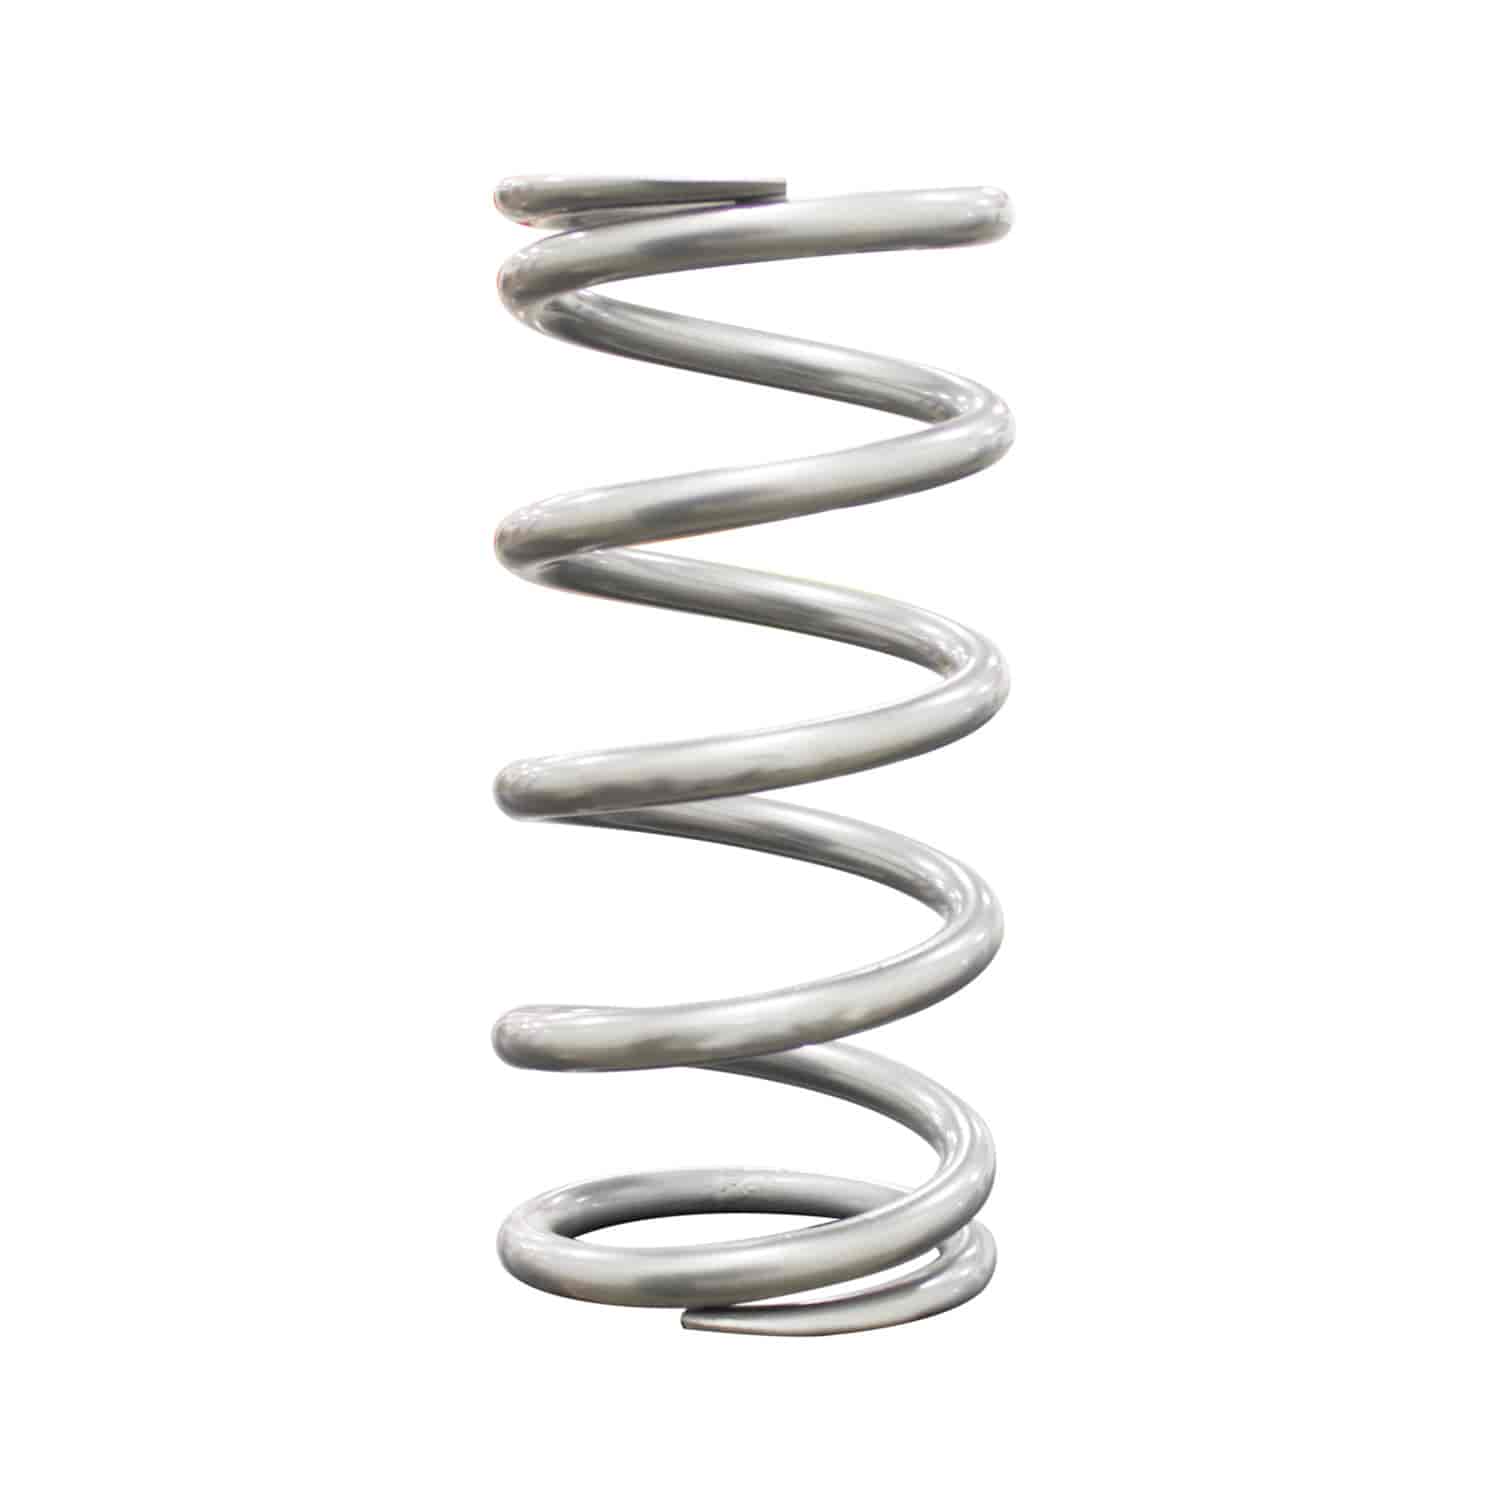 Powder-coated High Travel Coil Spring 7 in. Length